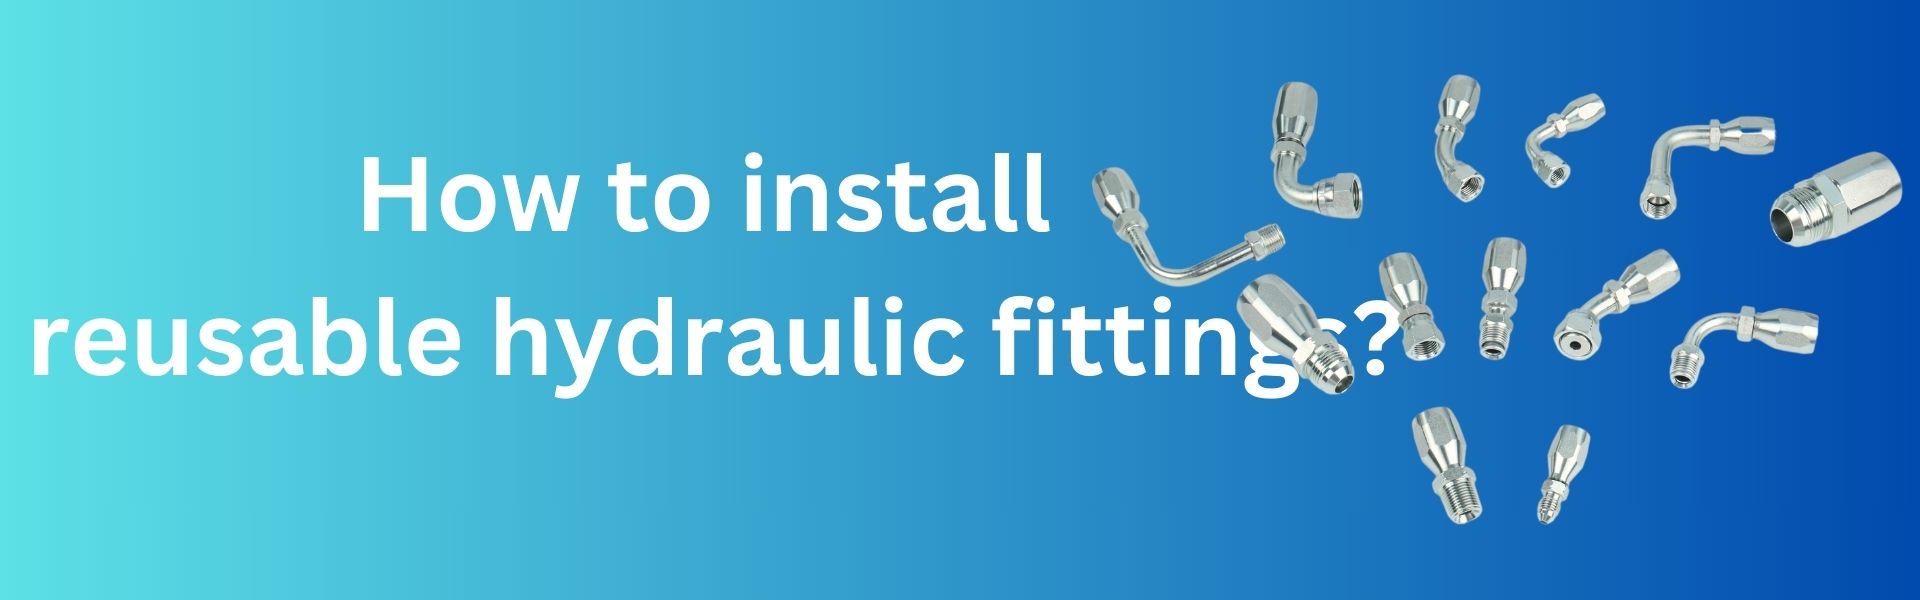 How to install reusable hydraulic fittings